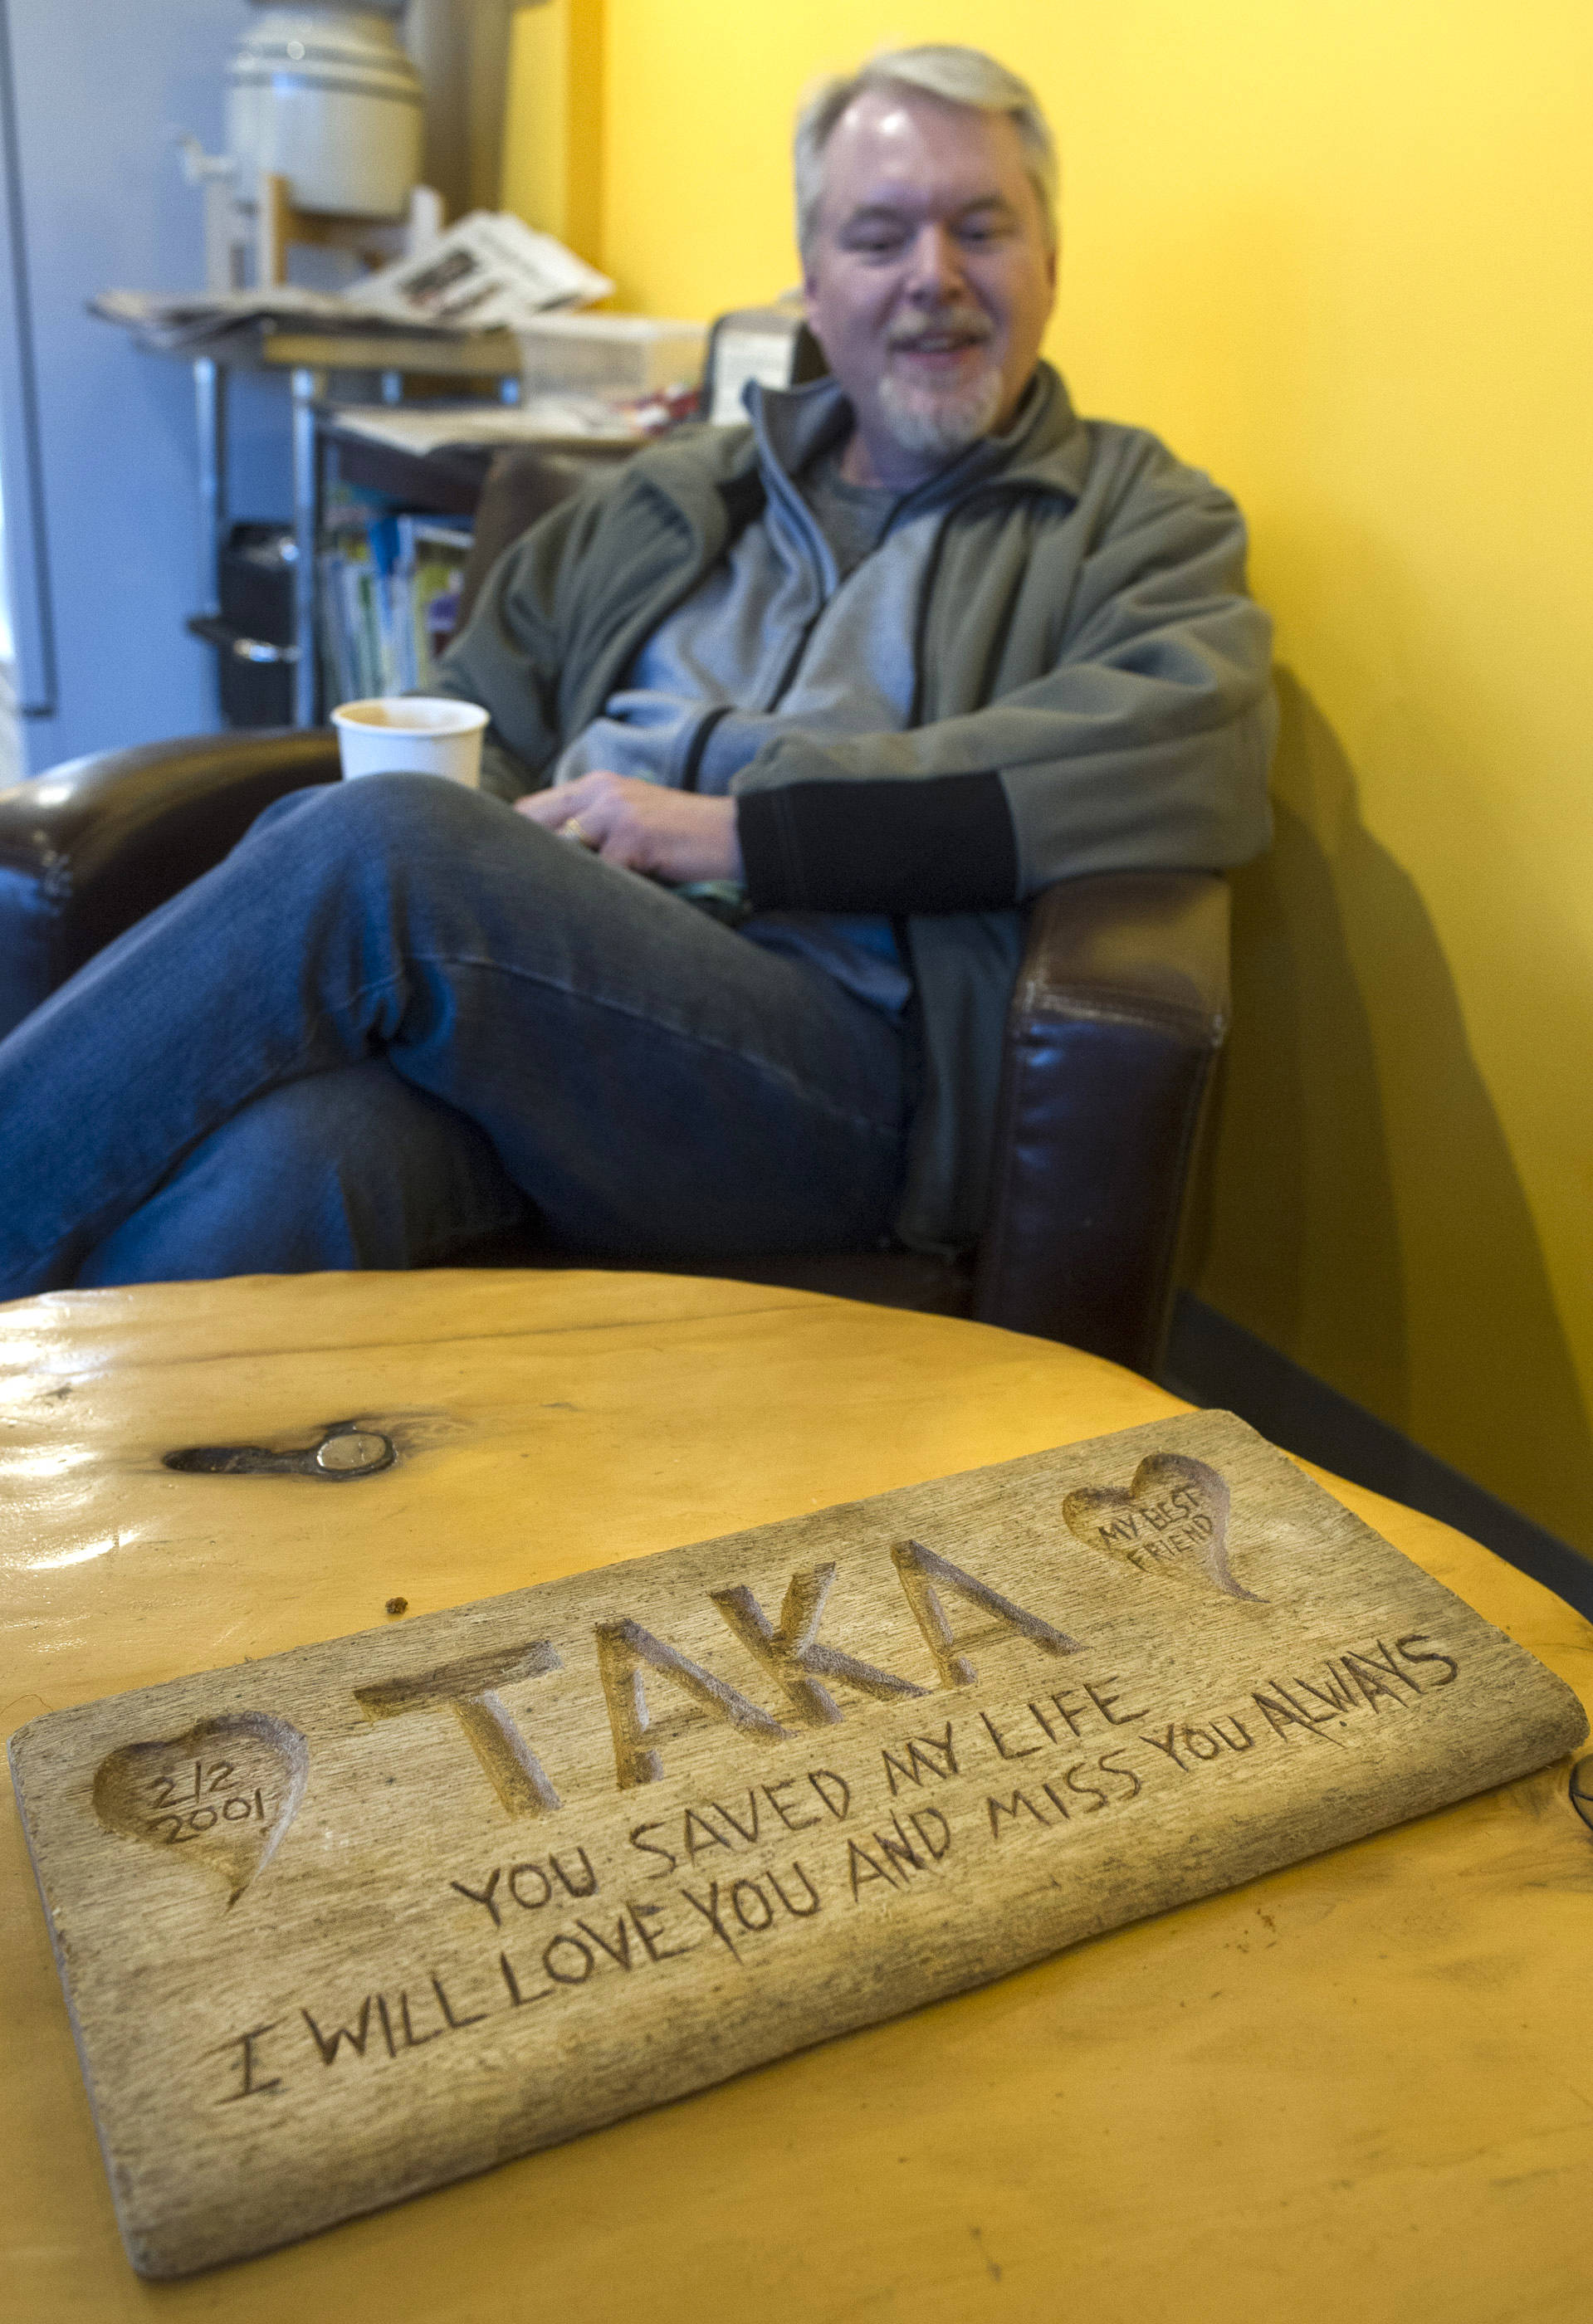 Guy Holt found a carved plaque on Sandy Beach 11 years ago and his been trying to find it owner ever since. Holt was photographed at Coppa on Thursday, Dec. 14, 2017. (Michael Penn | Juneau Empire)